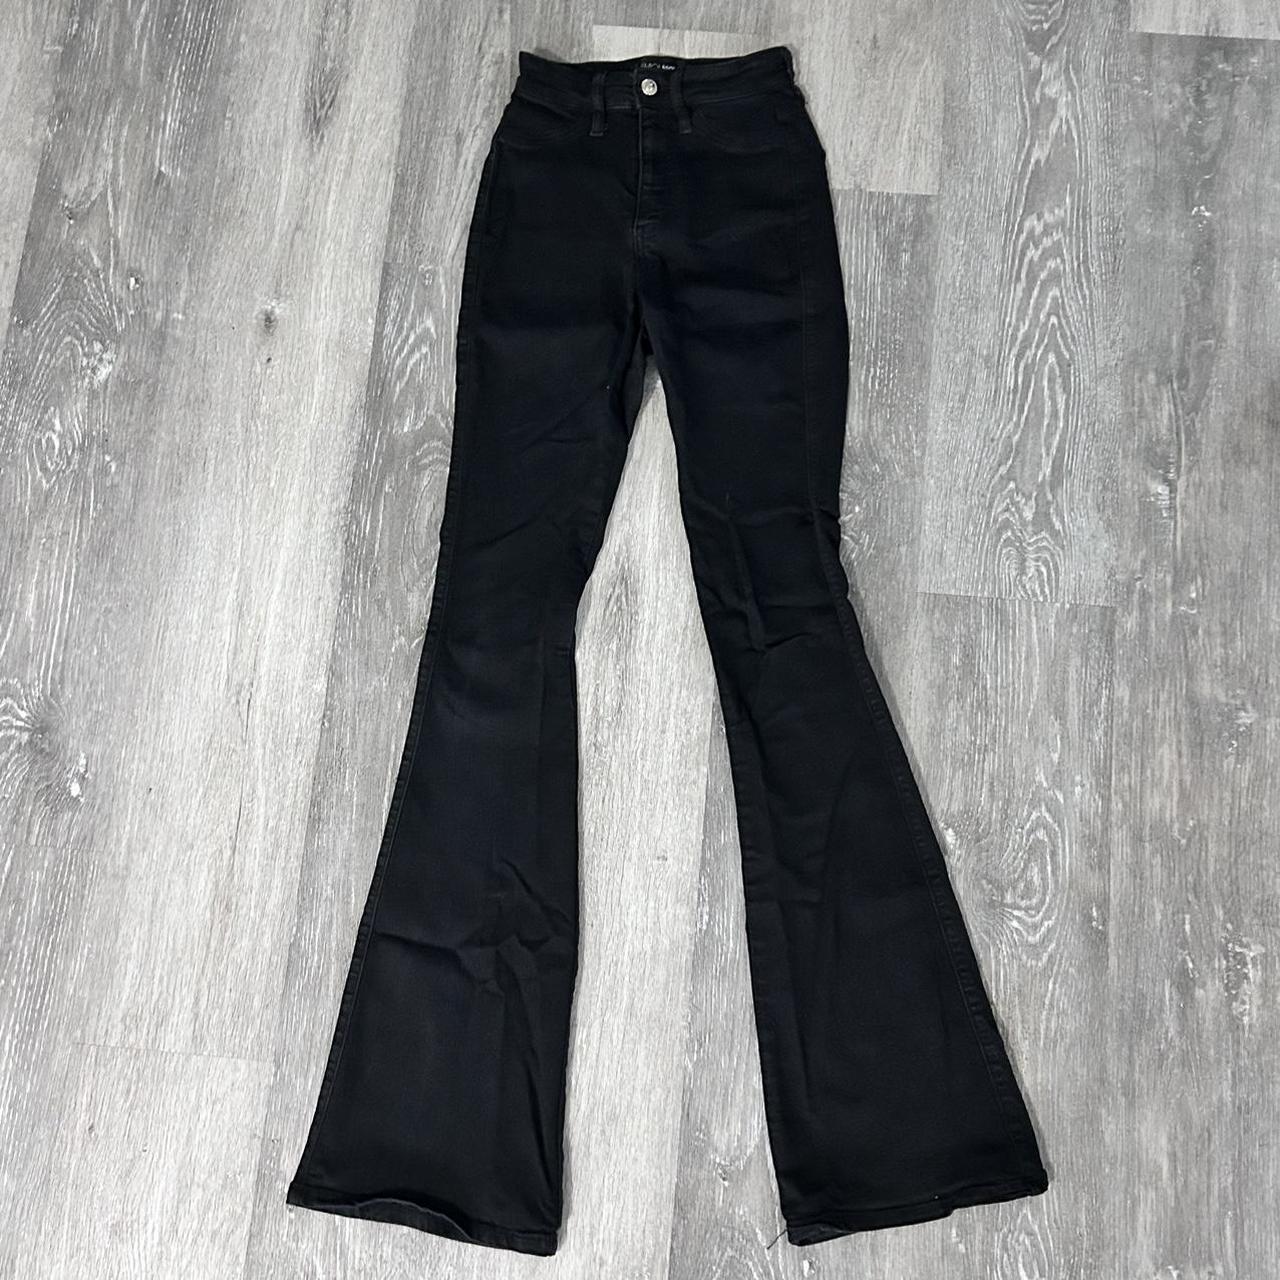 black high waisted flared jeans free shipping size... - Depop